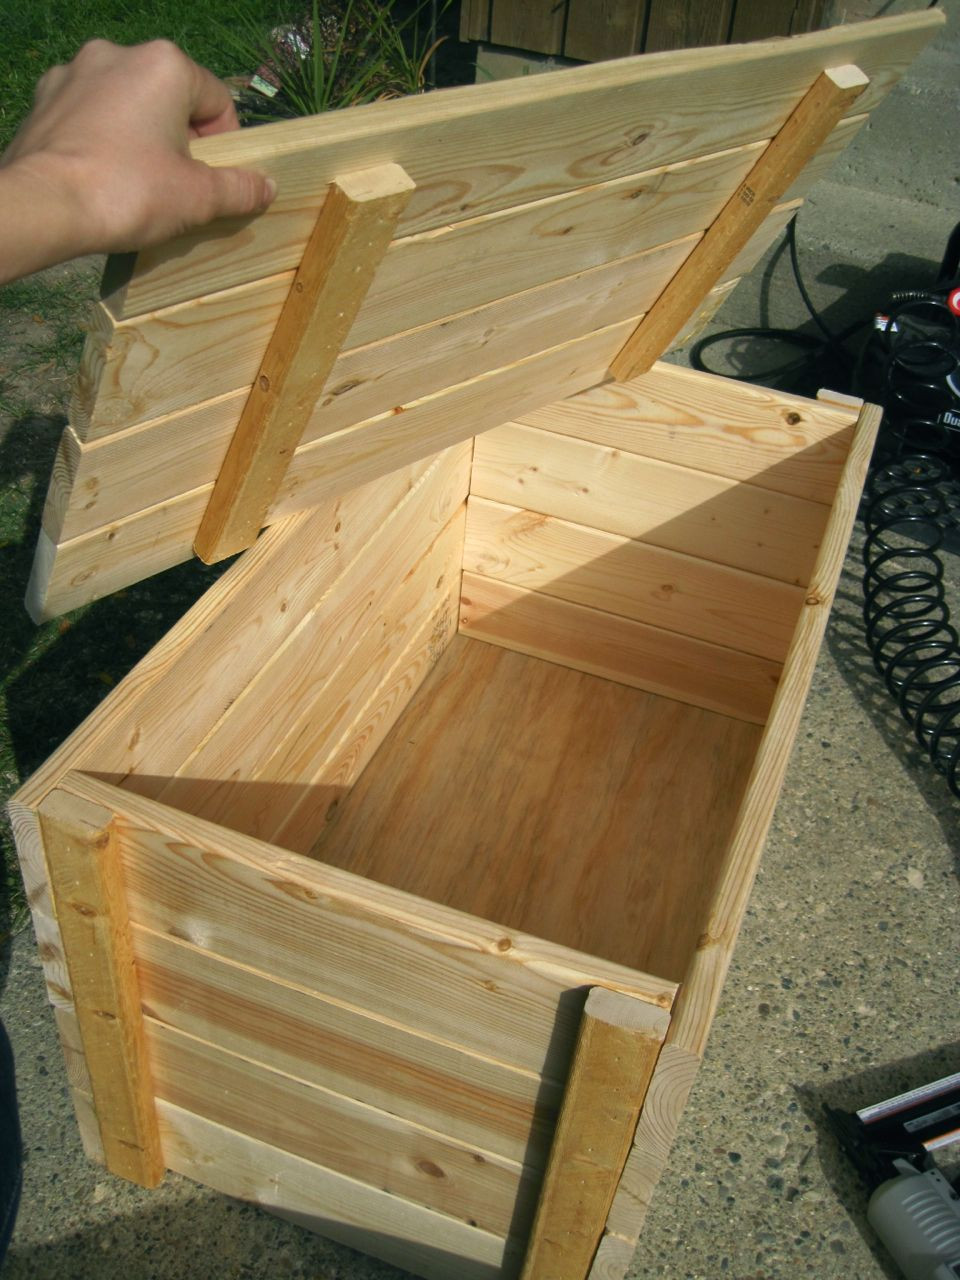 DIY Wooden Storage Box Plans
 Make a tack trunk use a real hinge and lock for top and